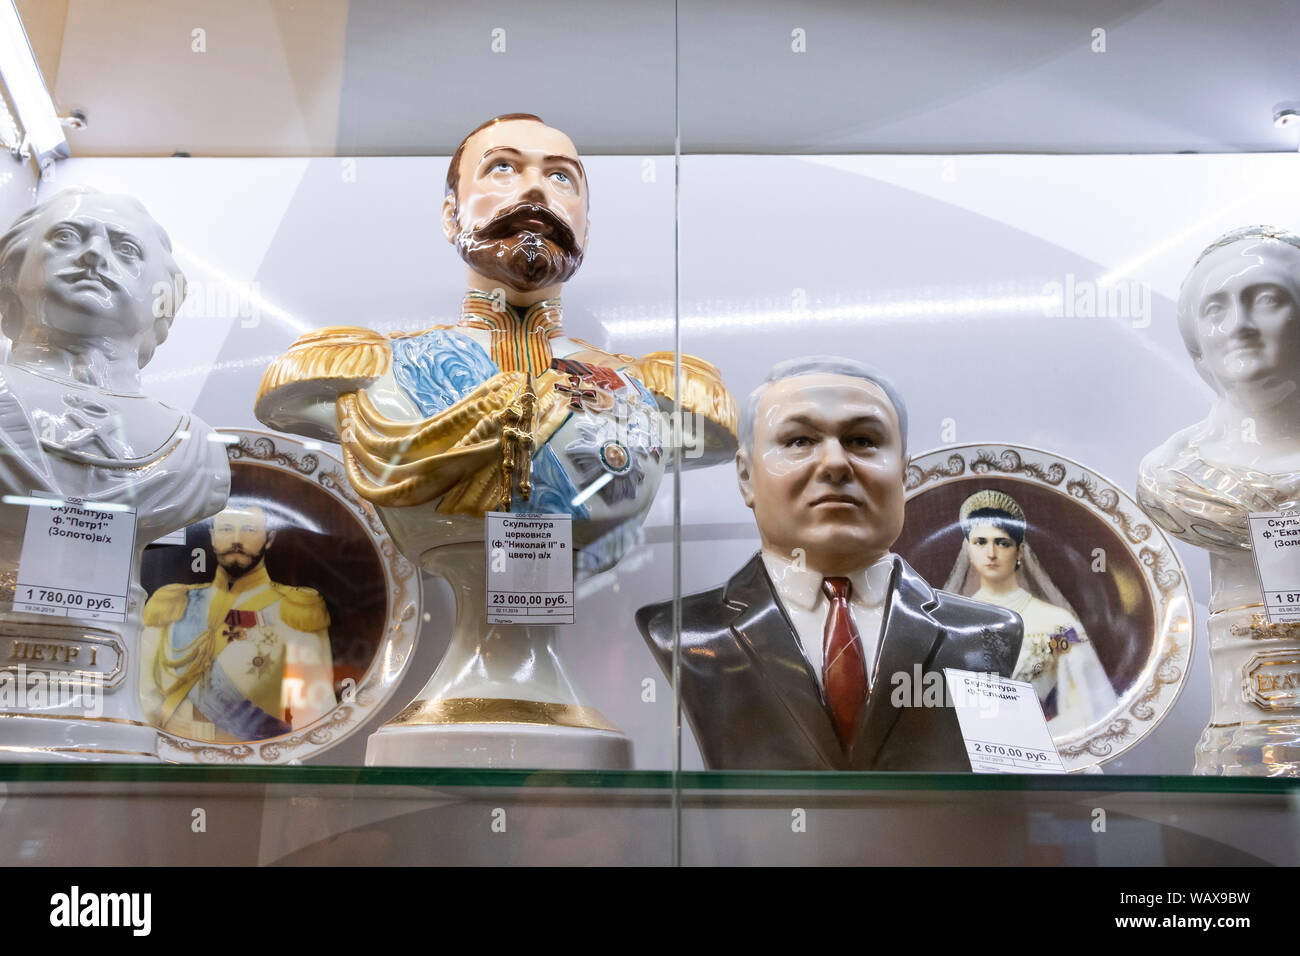 In the city of Ekaterinbourg, shops in the center, even at the airport, the representation of the Tsar Nikola II is everywhere.  Boris Elstine is some Stock Photo